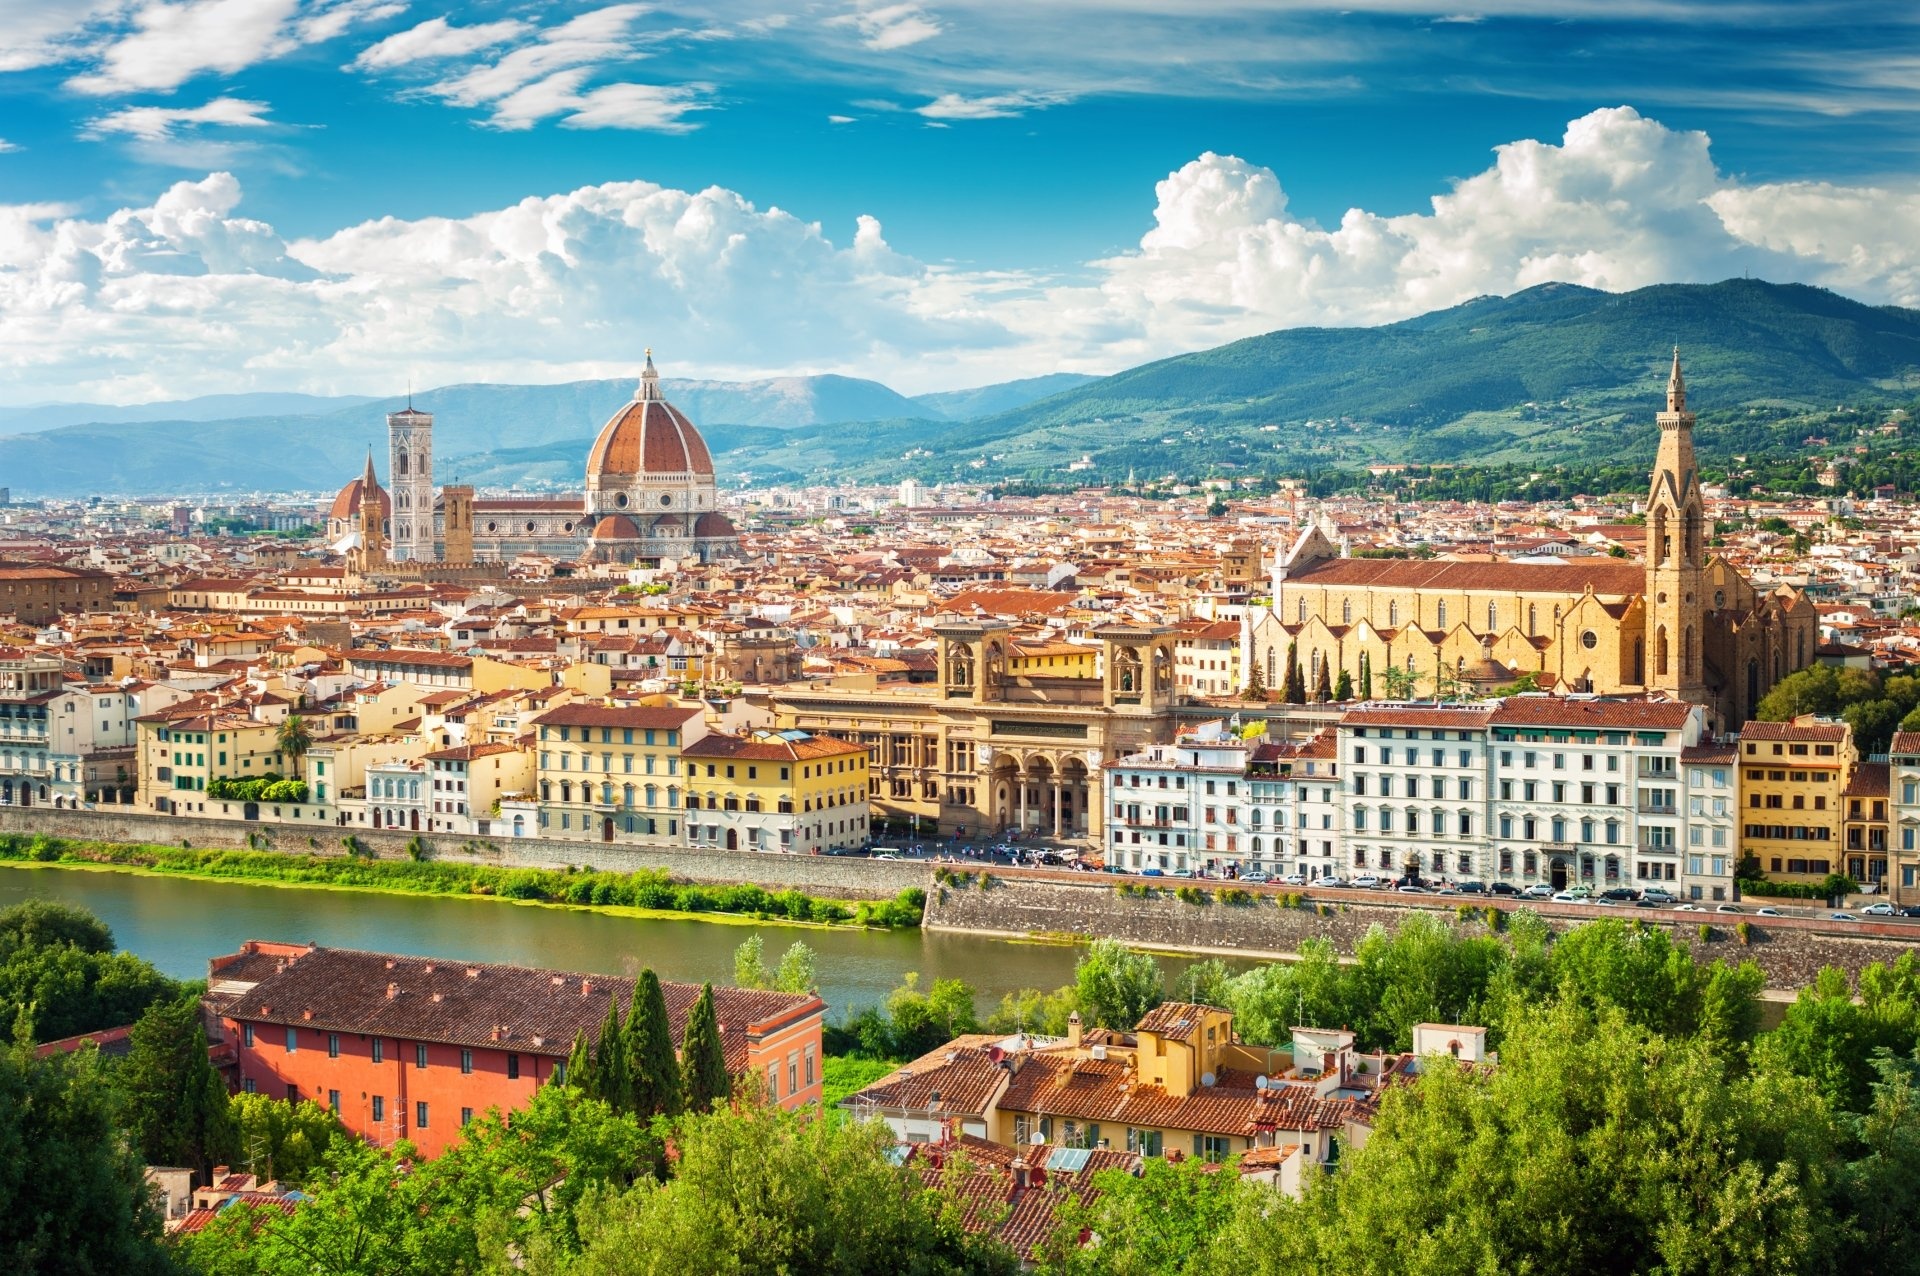 Florence: The Arno River, One of the rivers in central Italy, The old city. 1920x1280 HD Wallpaper.